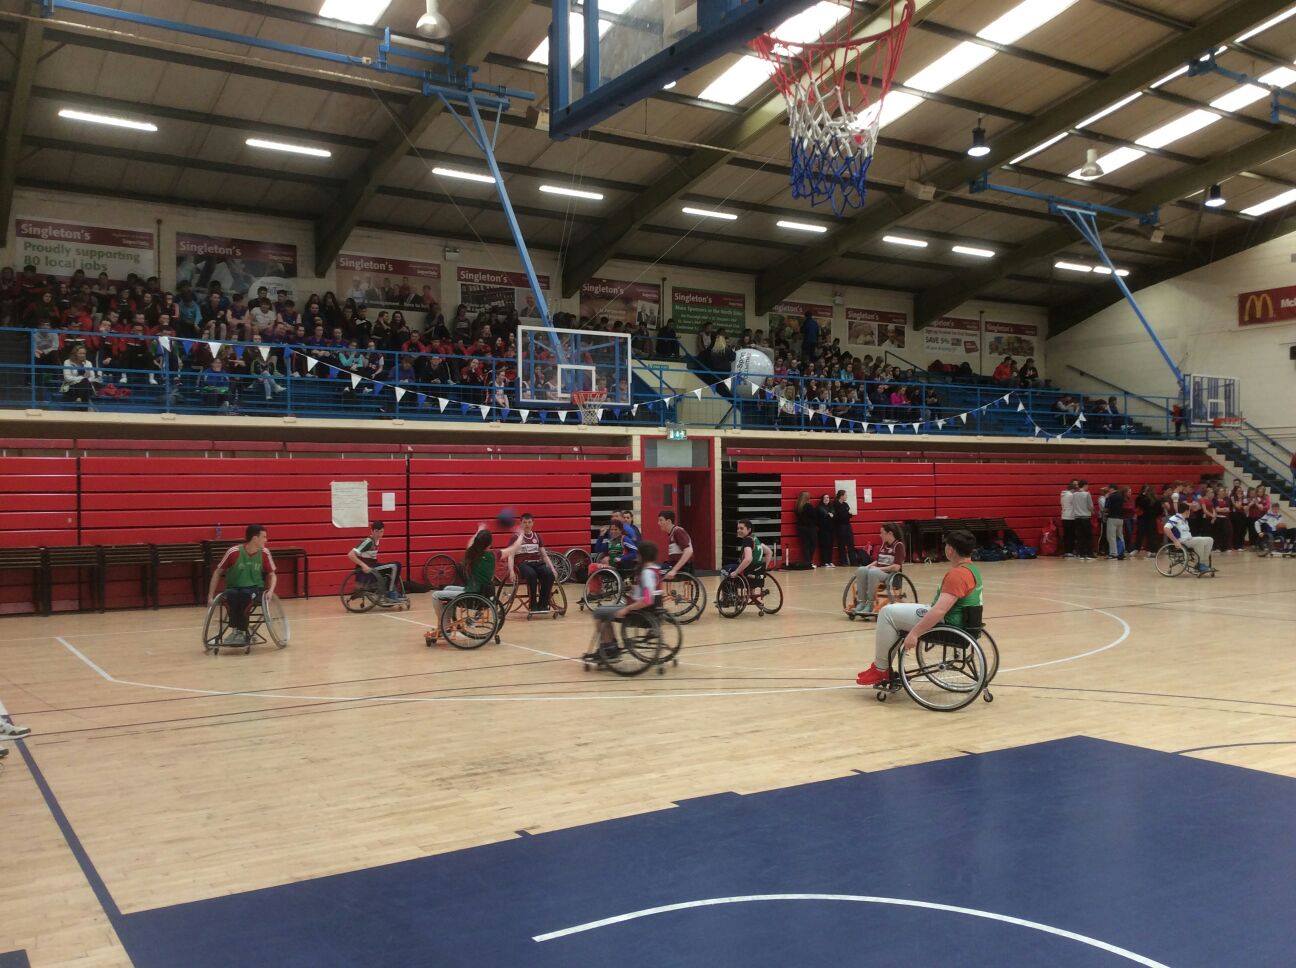 21st April 2016: Desmond College TY Students compete in Munster Wheelchair Basketball Competition. Active Schools Week 2016. #ActiveThursday